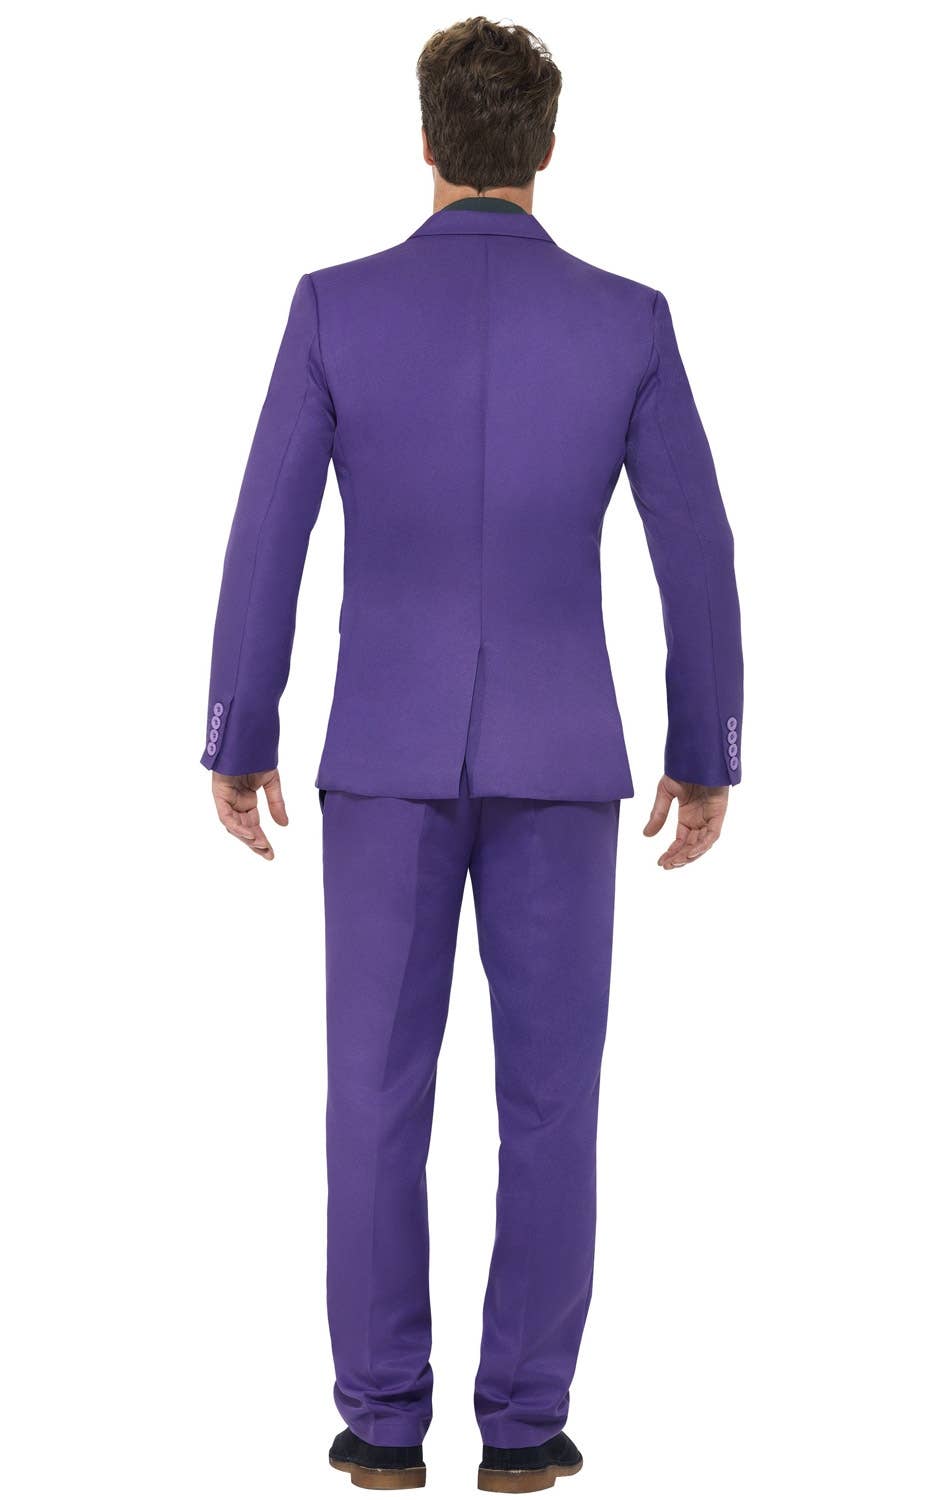 Deluxe Men's Bright Purple Suit from Stand Out Suits Image 3